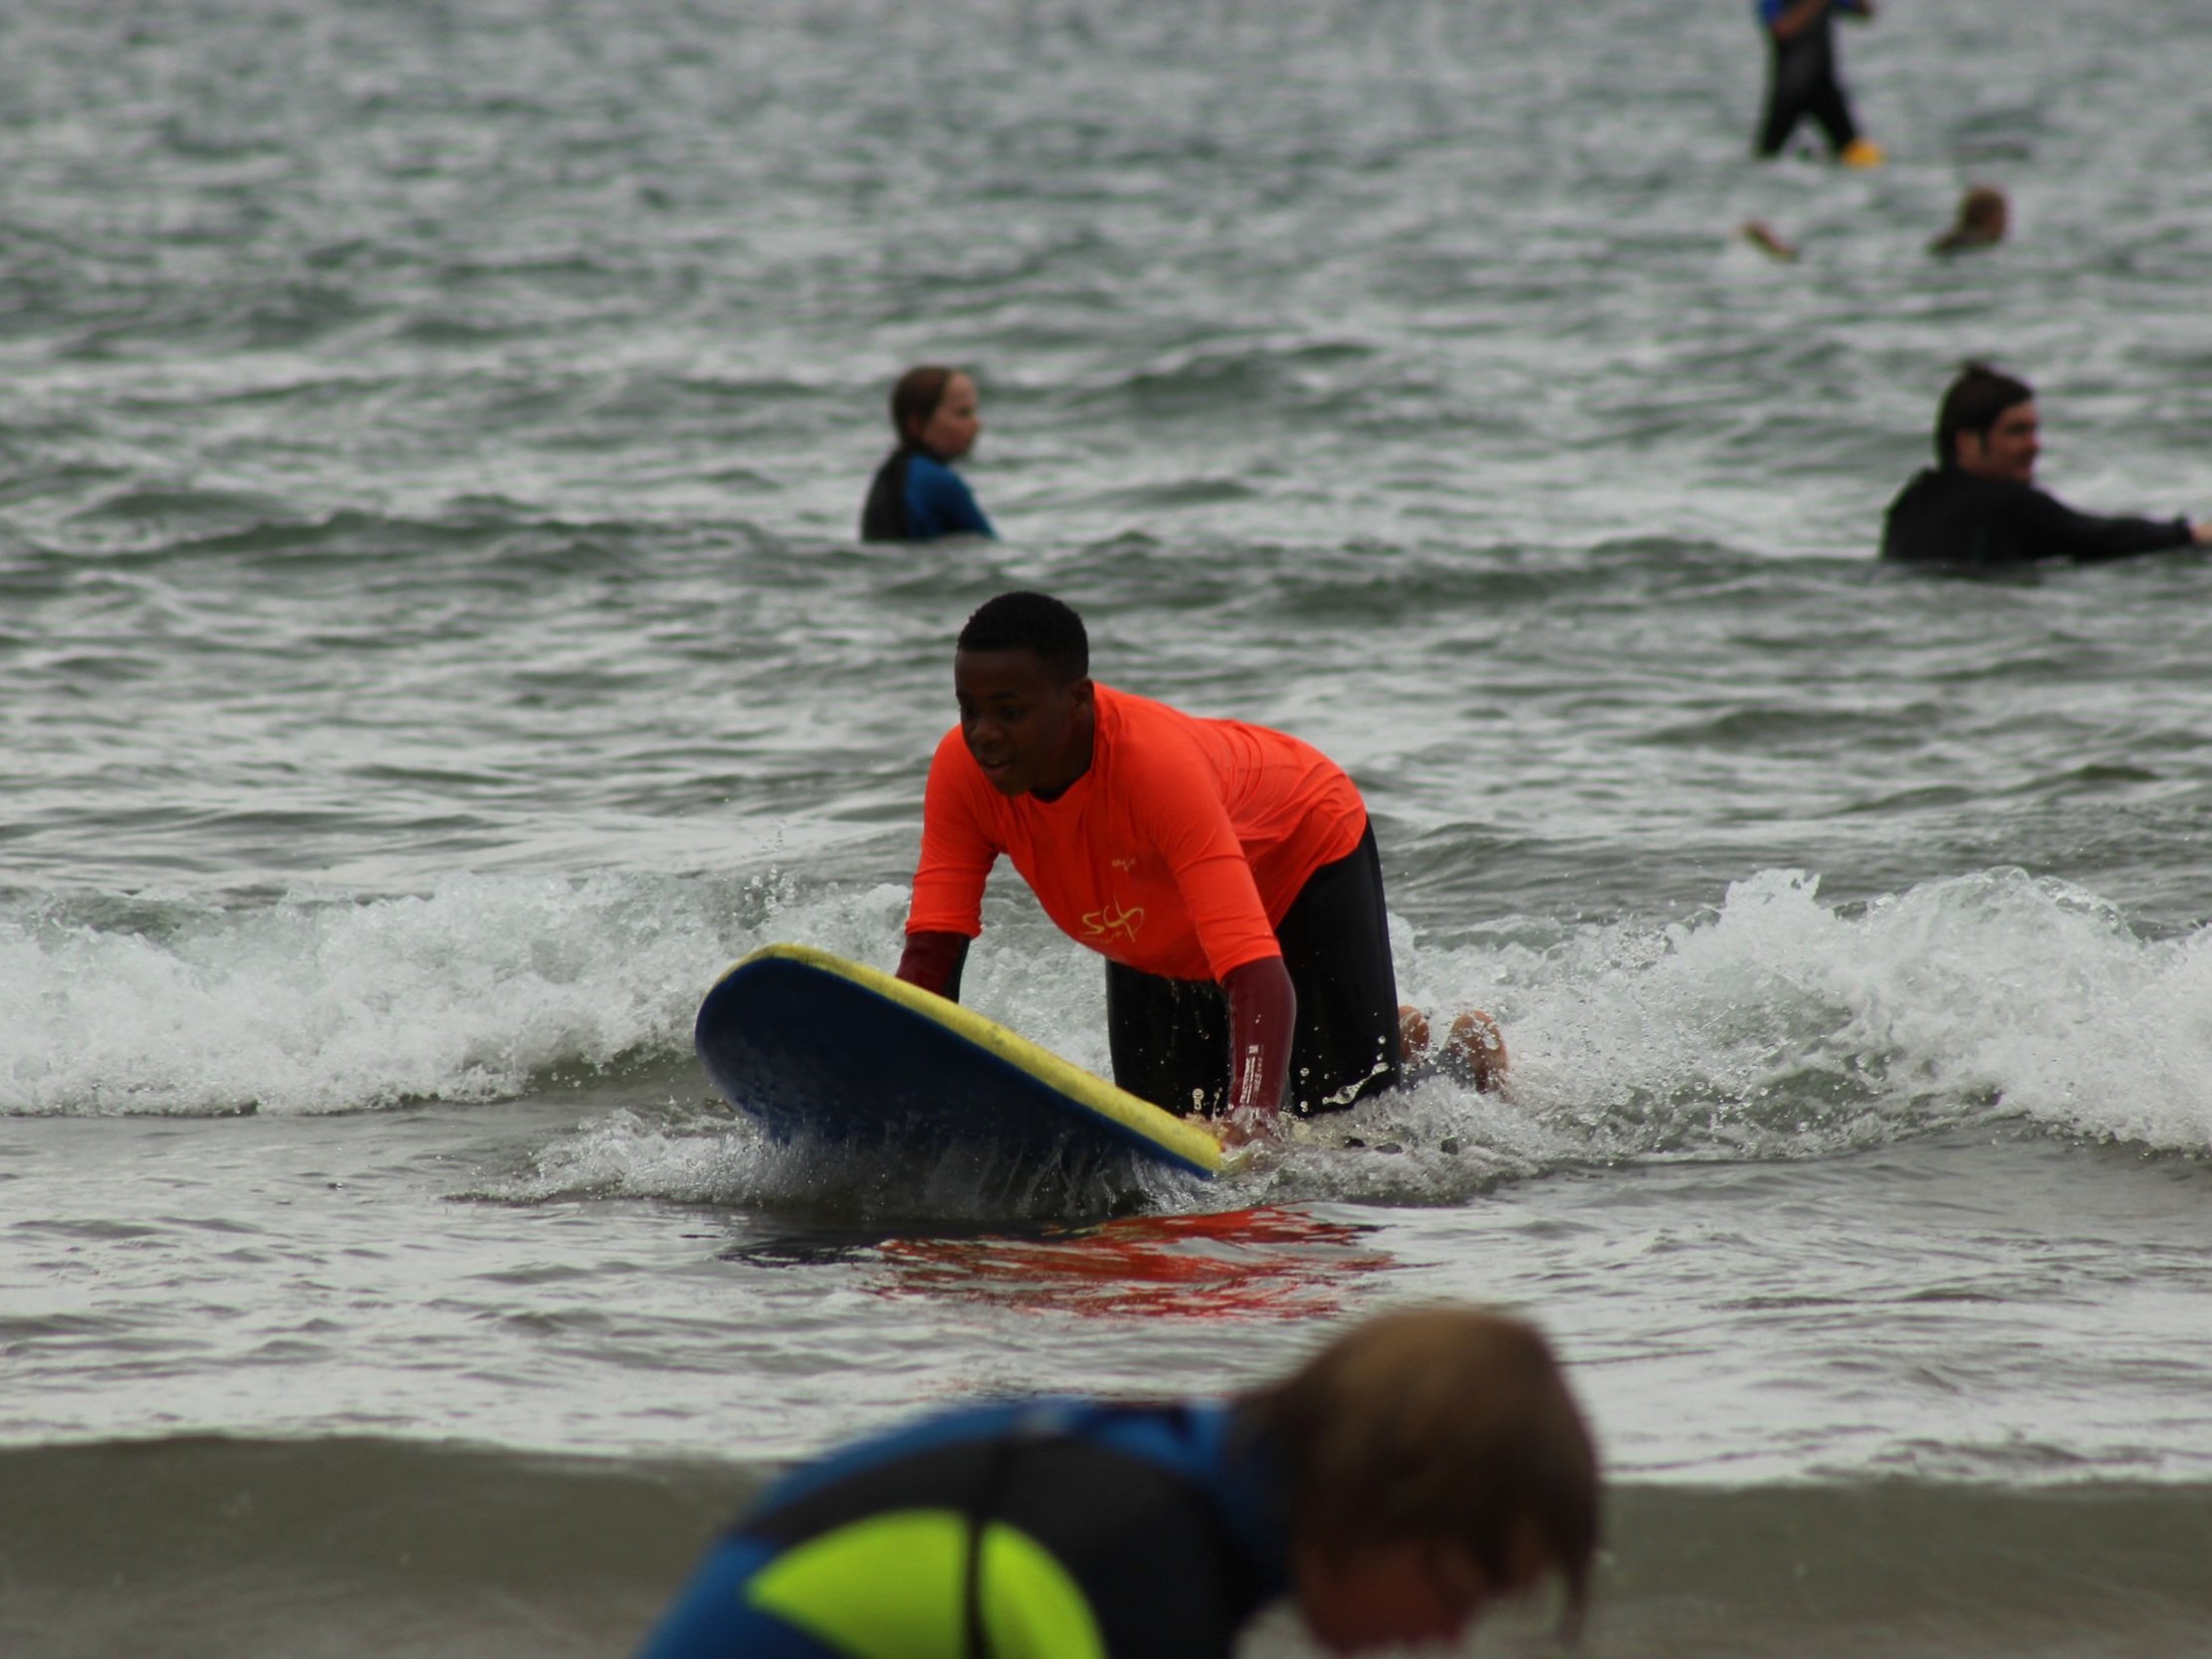 Learning to surf for all abilities - beginners to advanced!